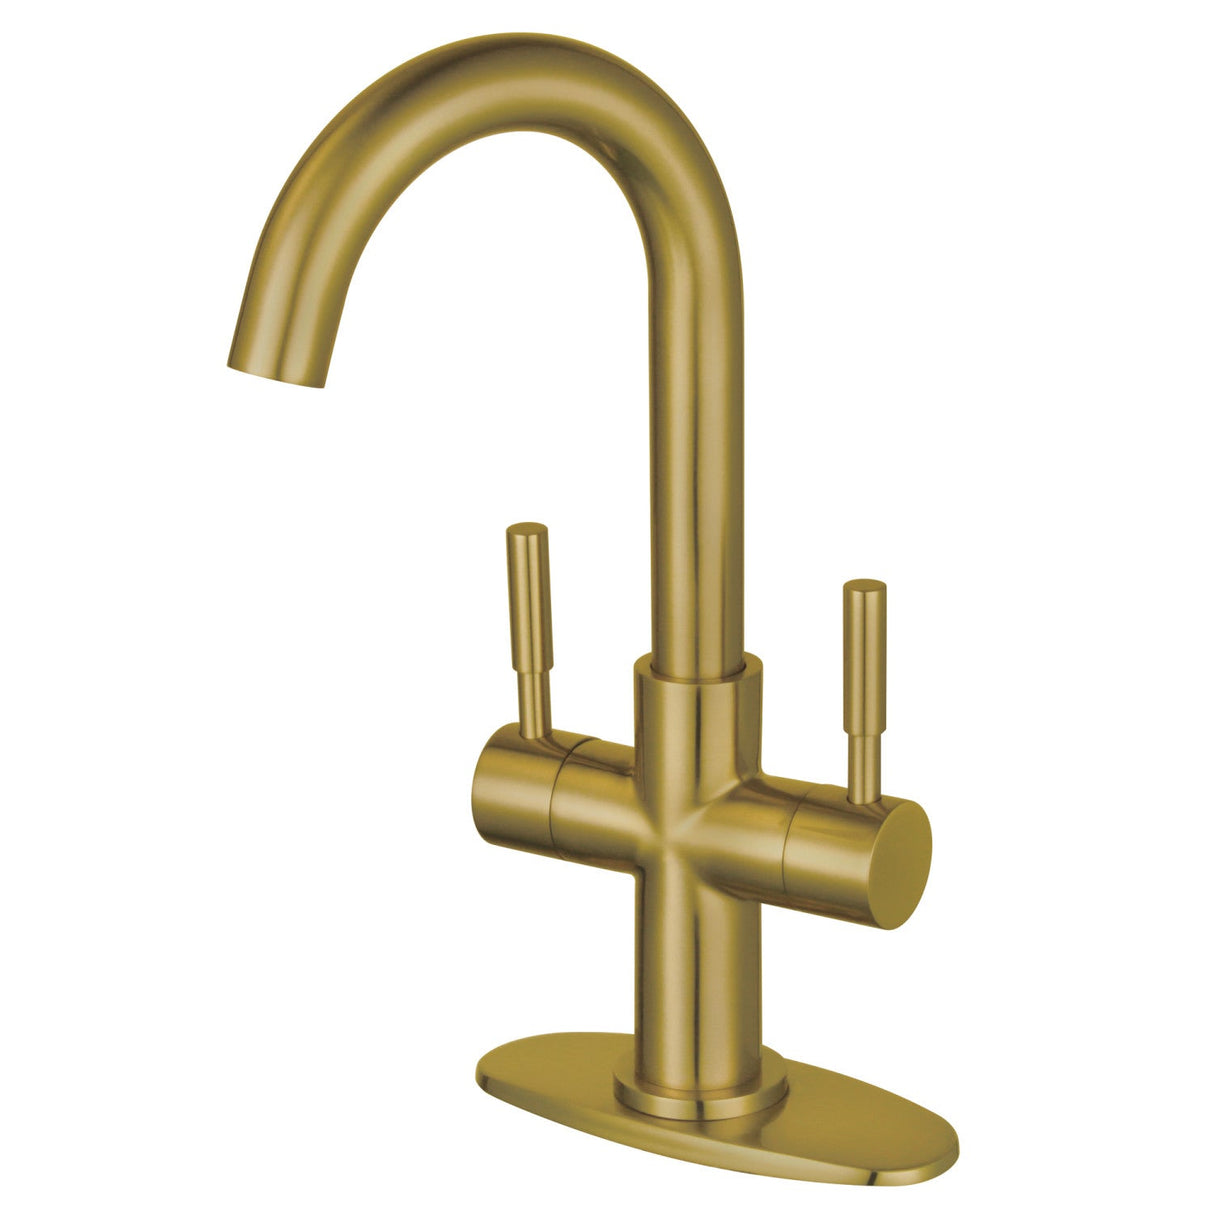 Concord LS8453DL Two-Handle 1-Hole Deck Mount Bathroom Faucet with Push Pop-Up, Brushed Brass